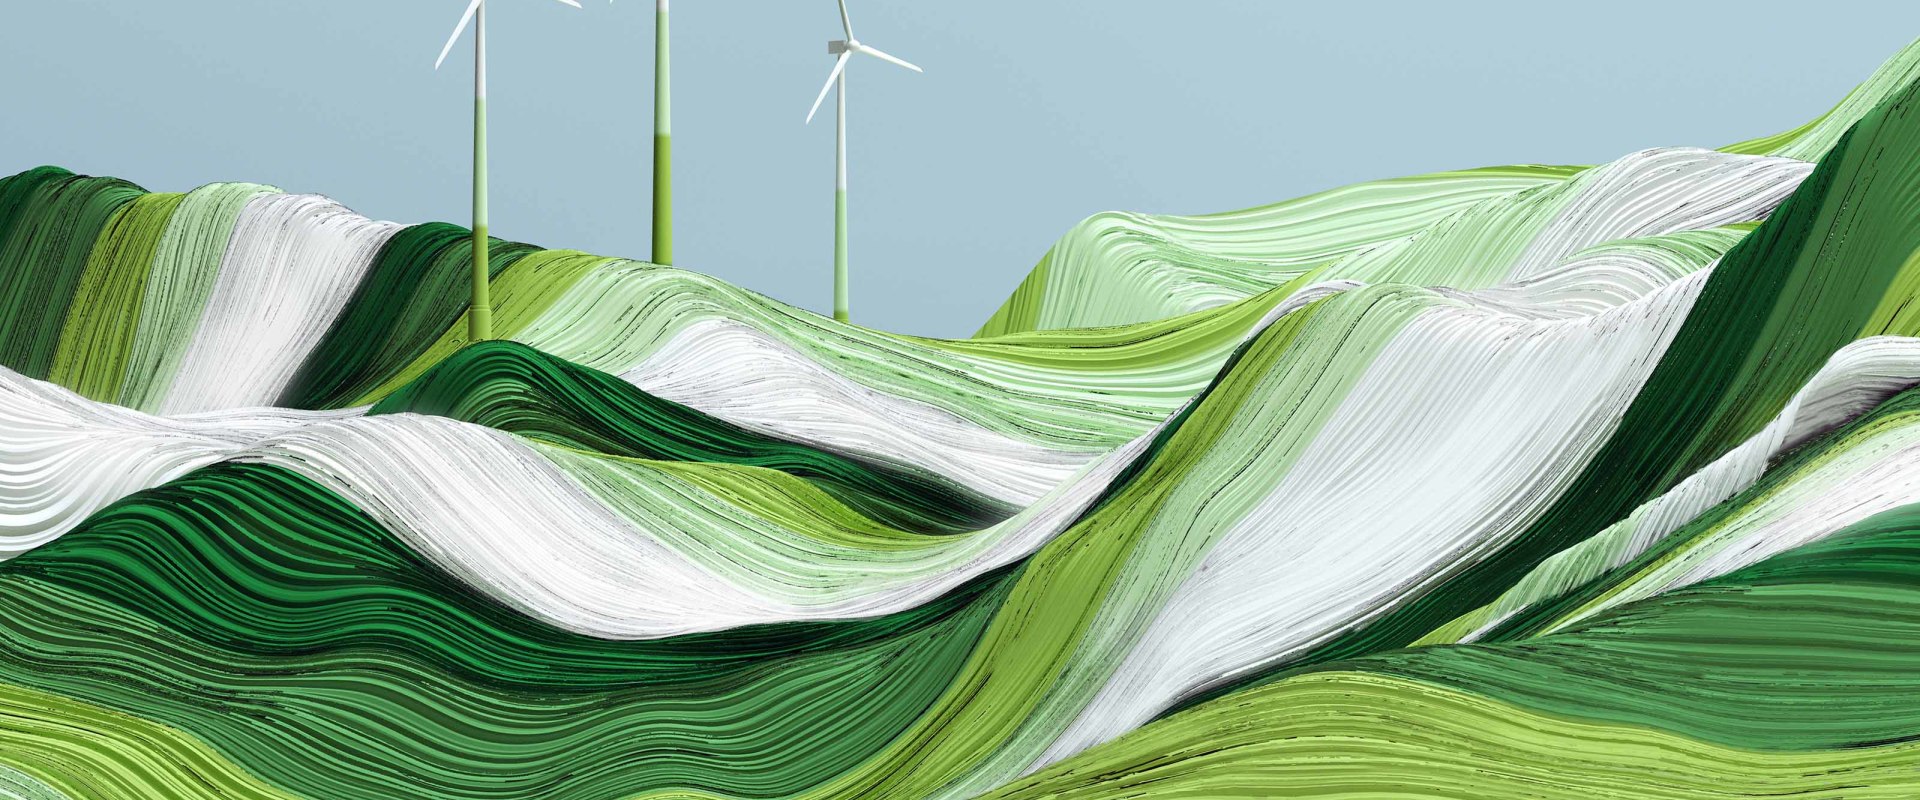 The Best Green Energy Stocks to Invest In Now